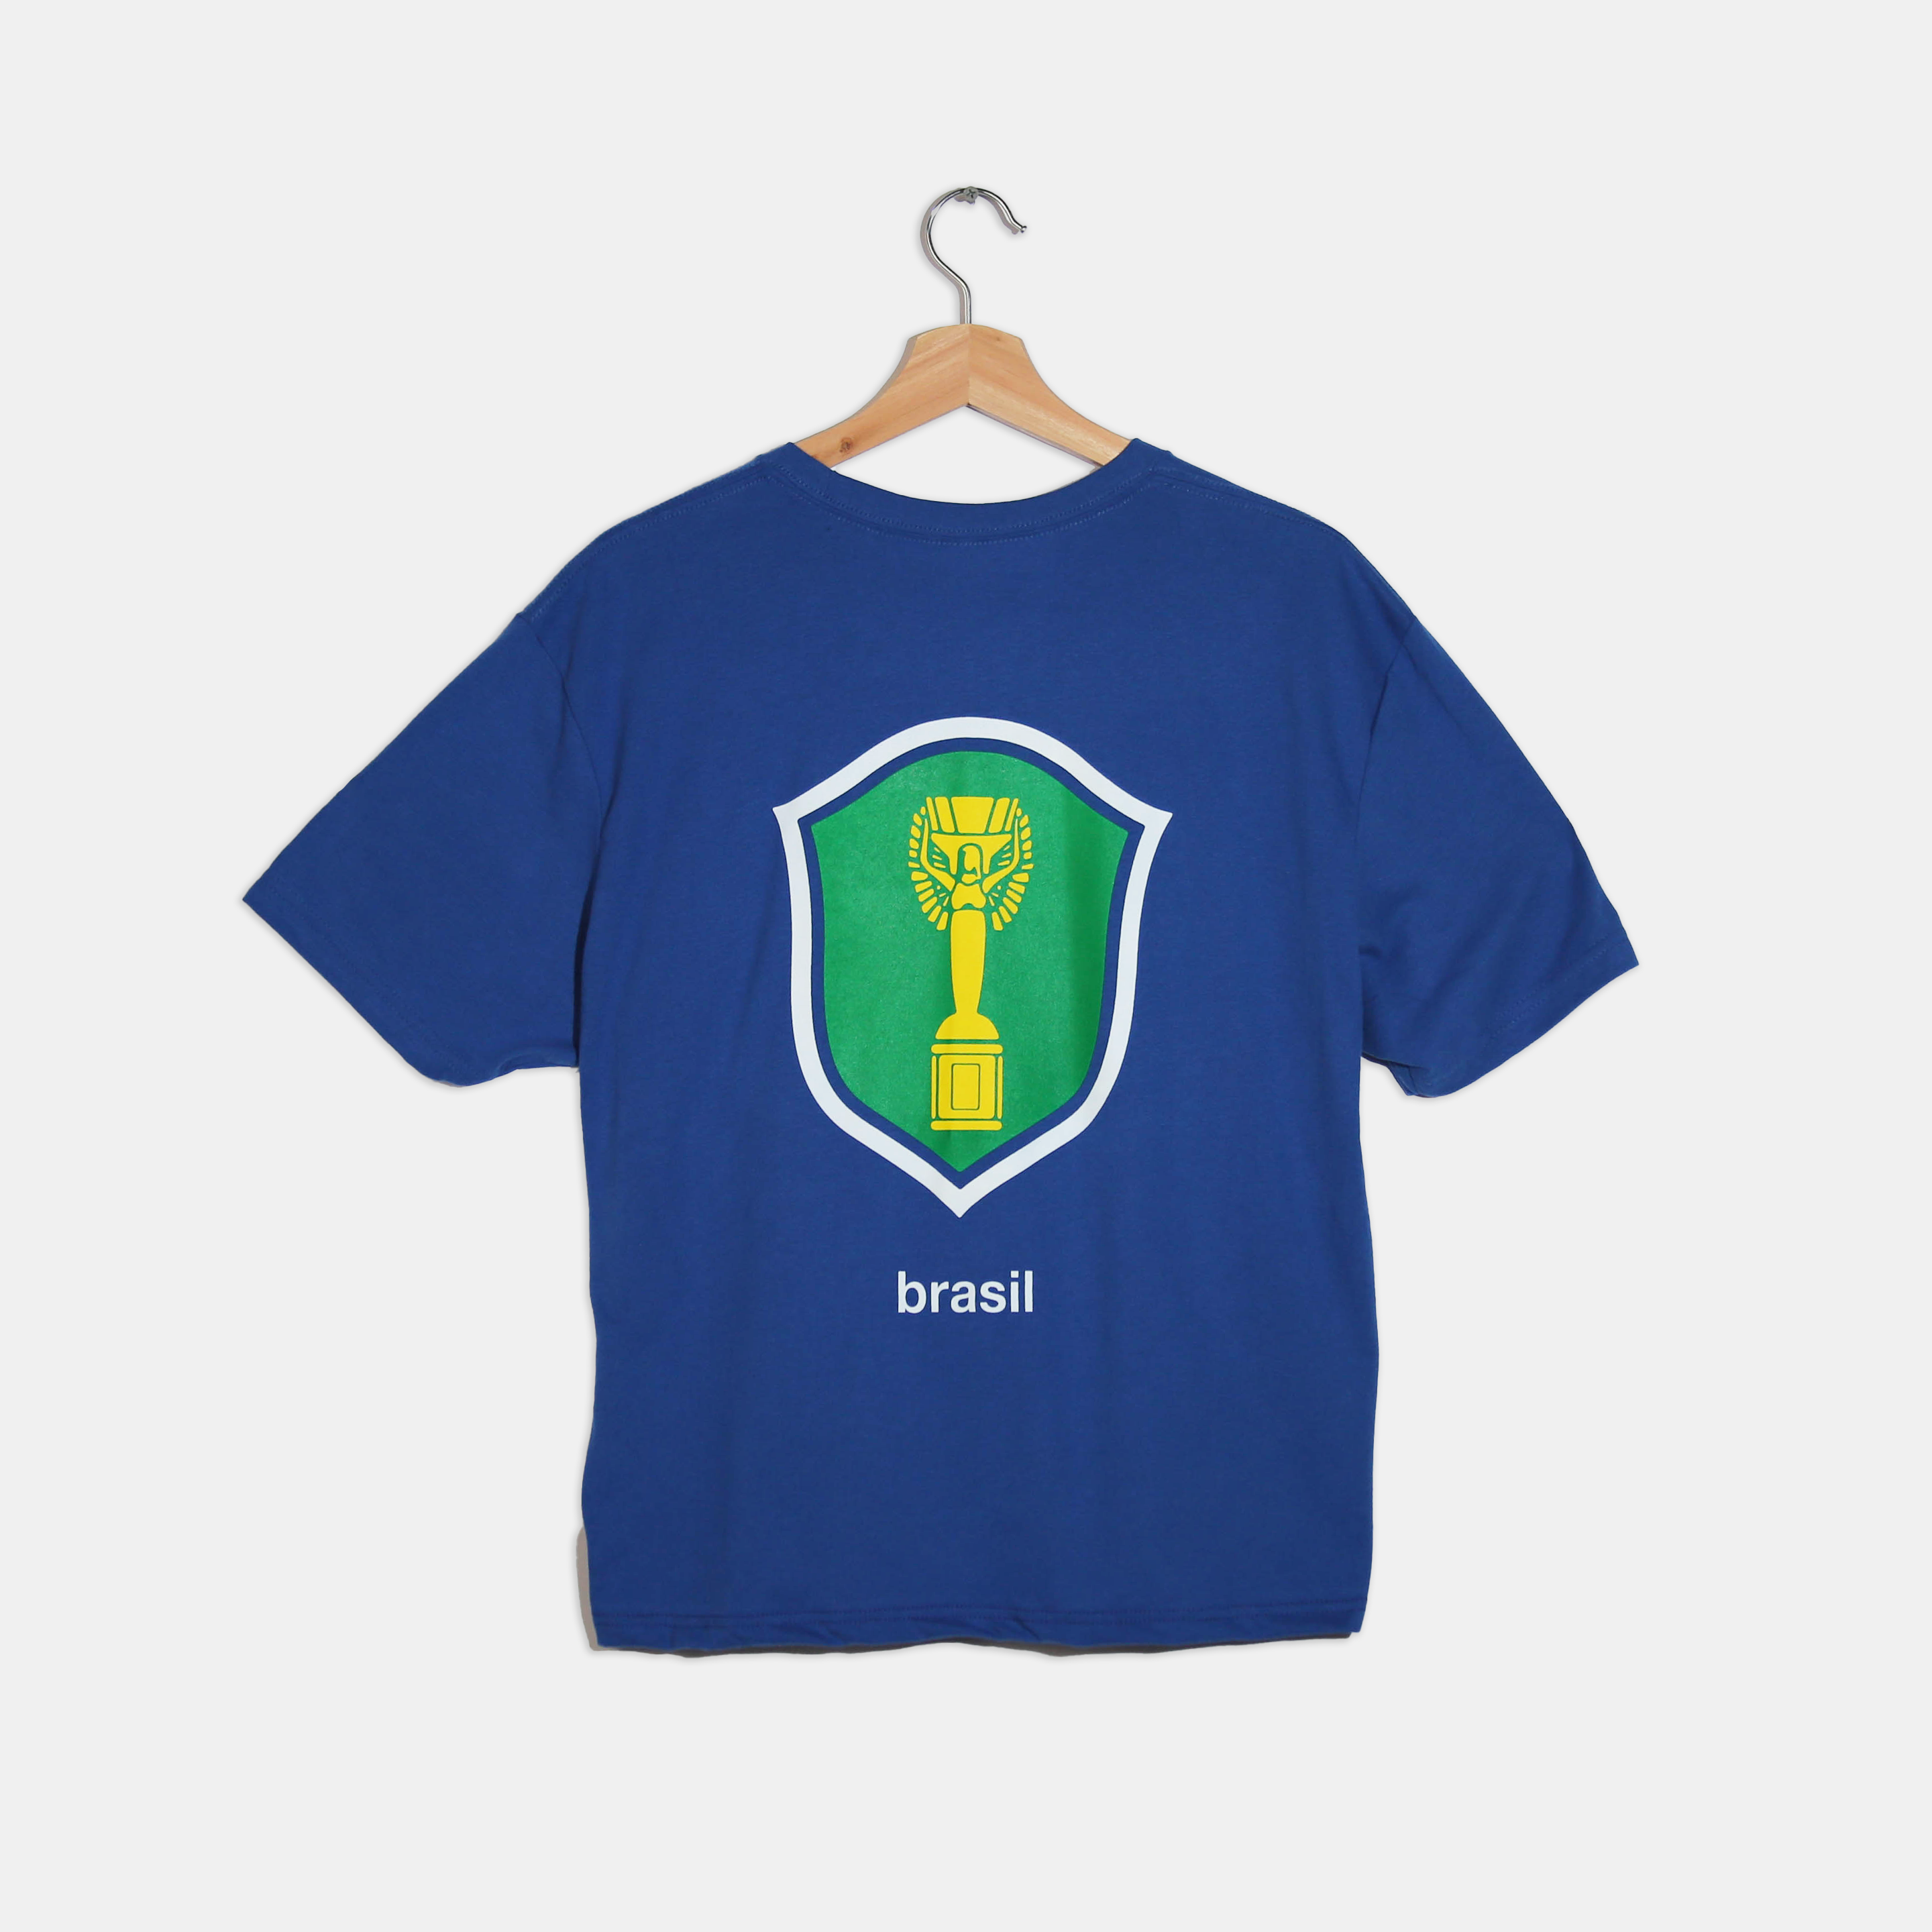 "Unofficial" Brazil Cropped Tee